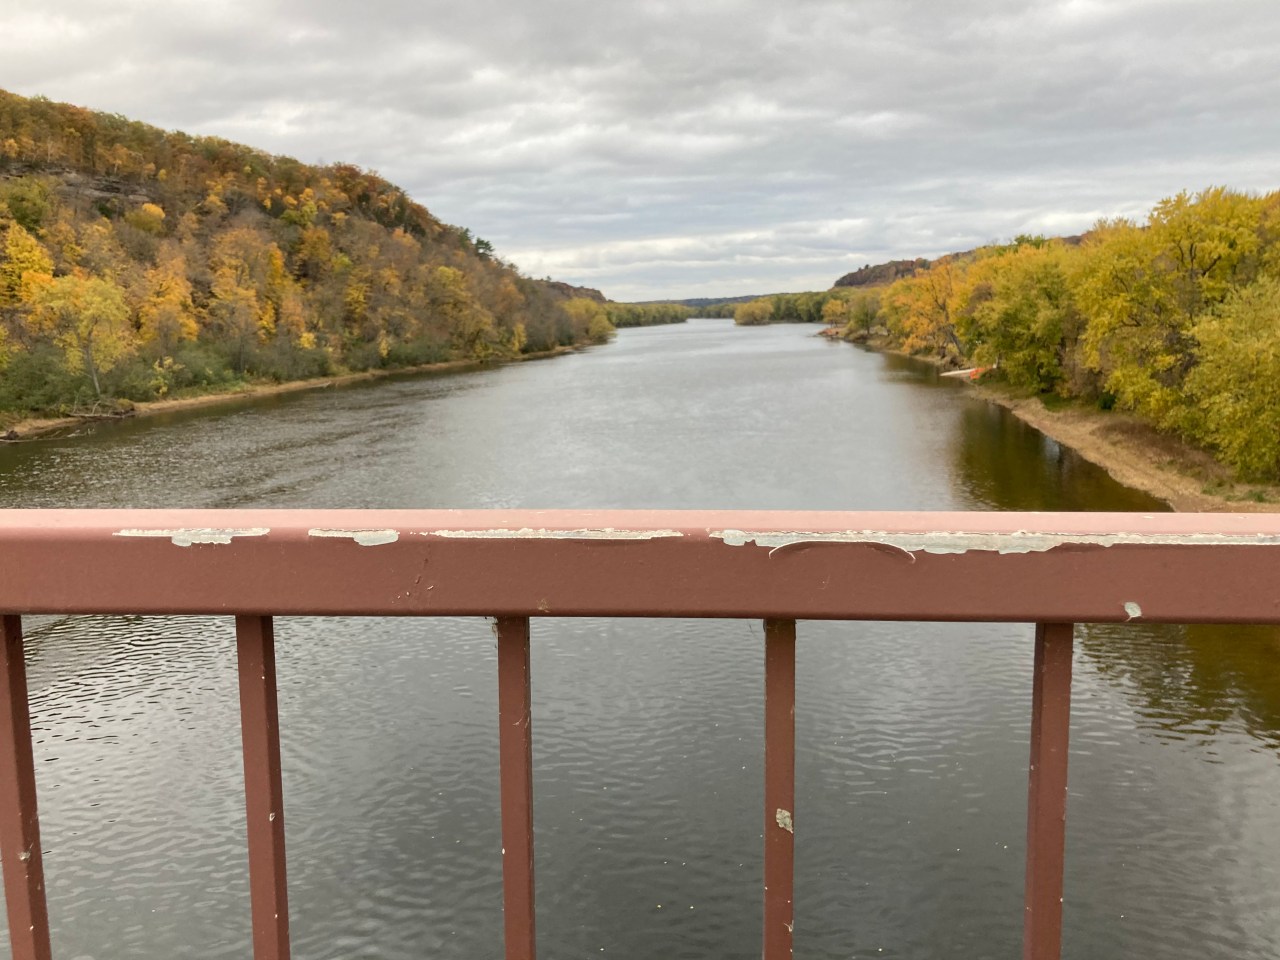 Crossing the St. Croix River from Minnesota into Wisconsin. Photo: John Greenfield